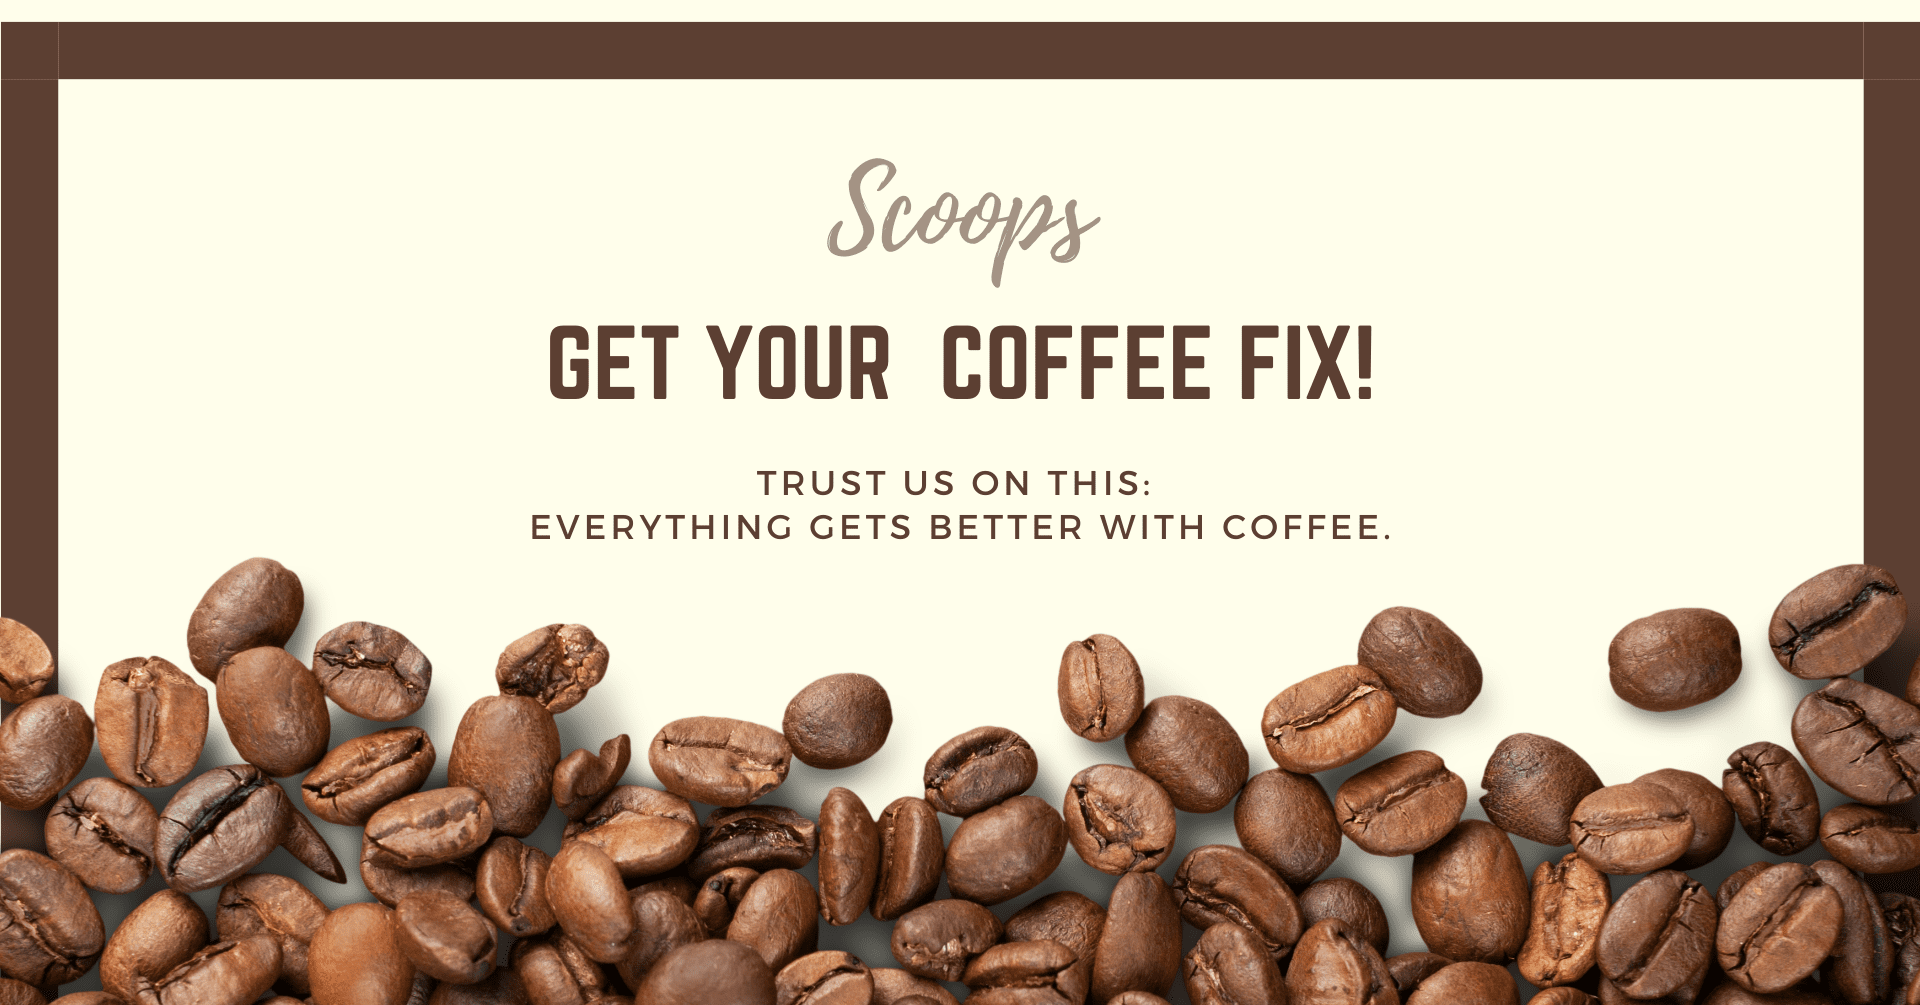 Scoops Get Your Coffee Fix